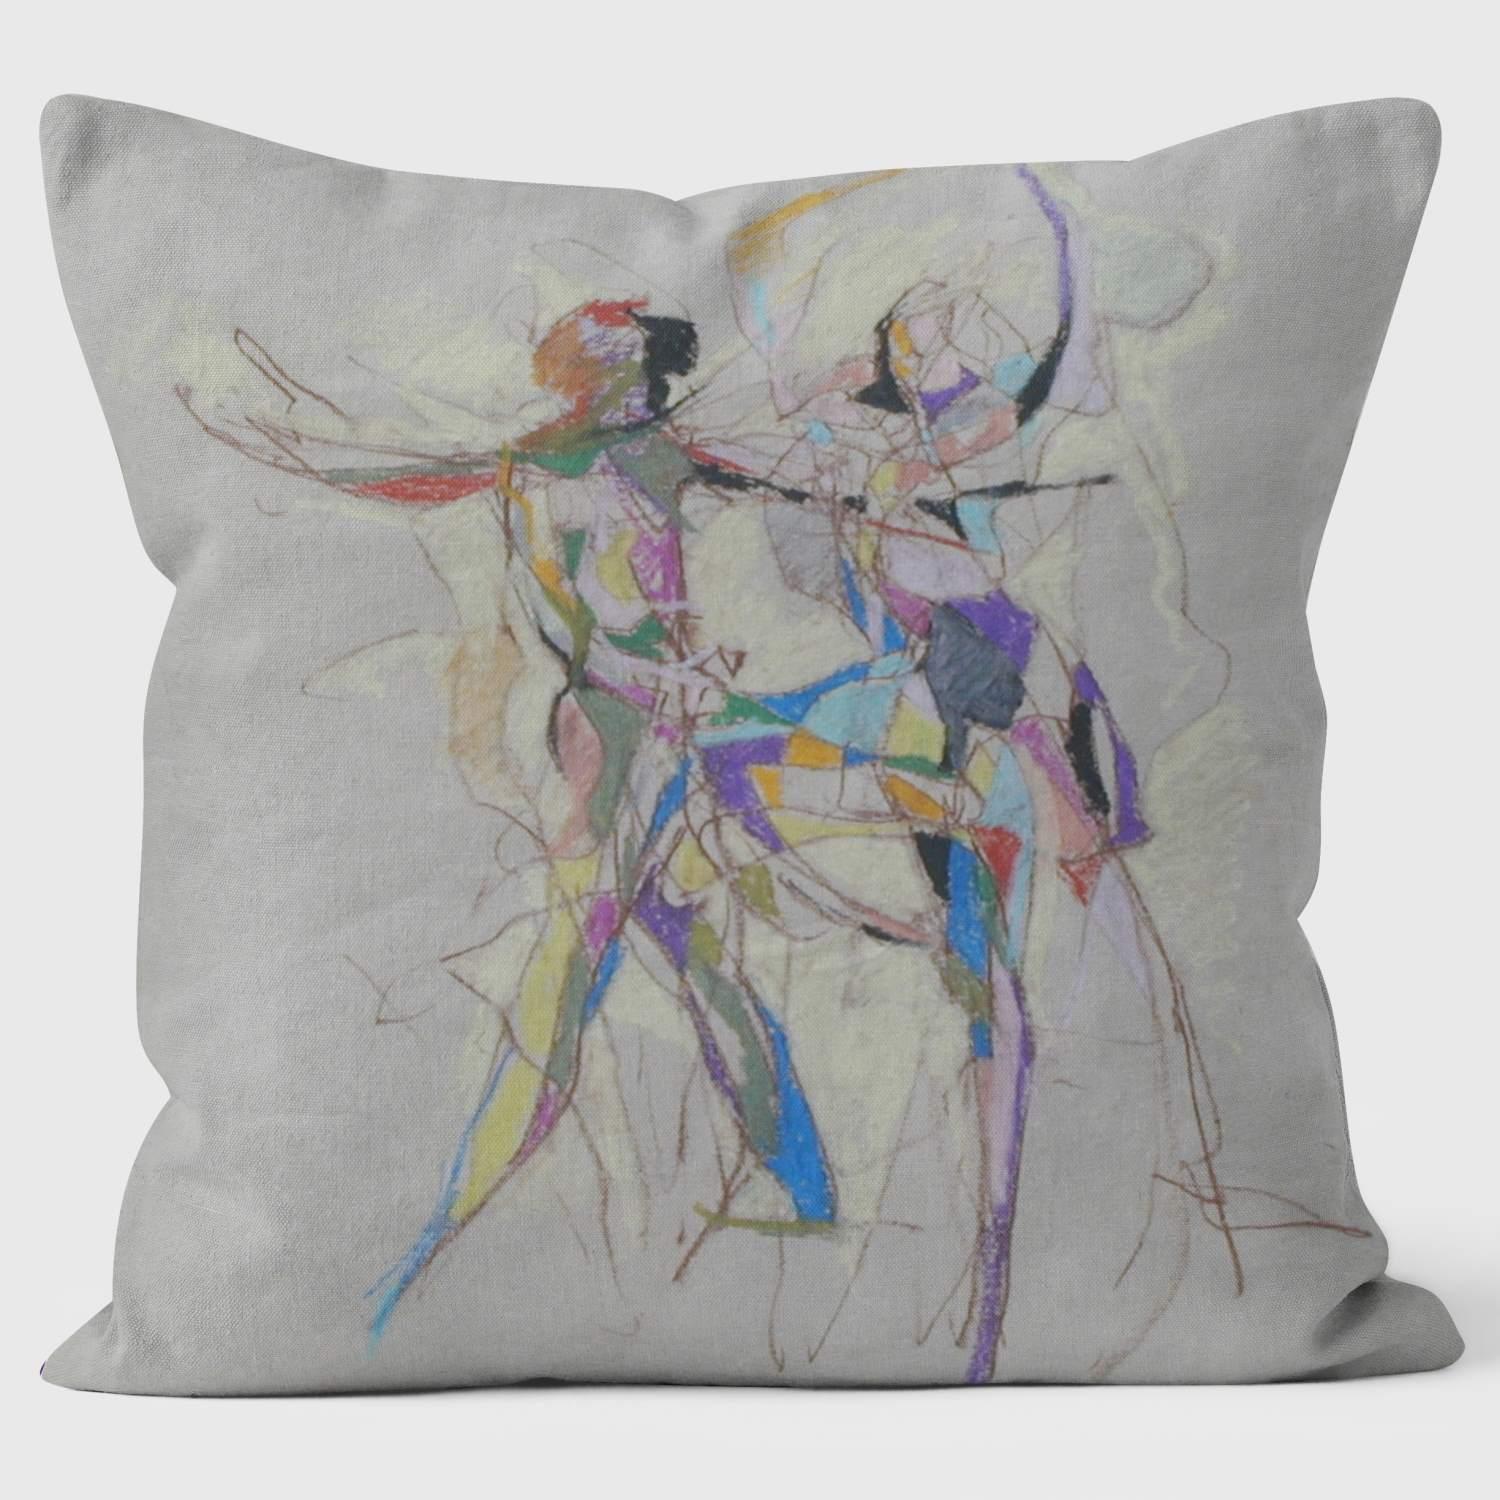 Victor and Genias pas de deux Ballet Inspired Cushion- Charlotte Leadbeater - Handmade Cushions UK - WeLoveCushions